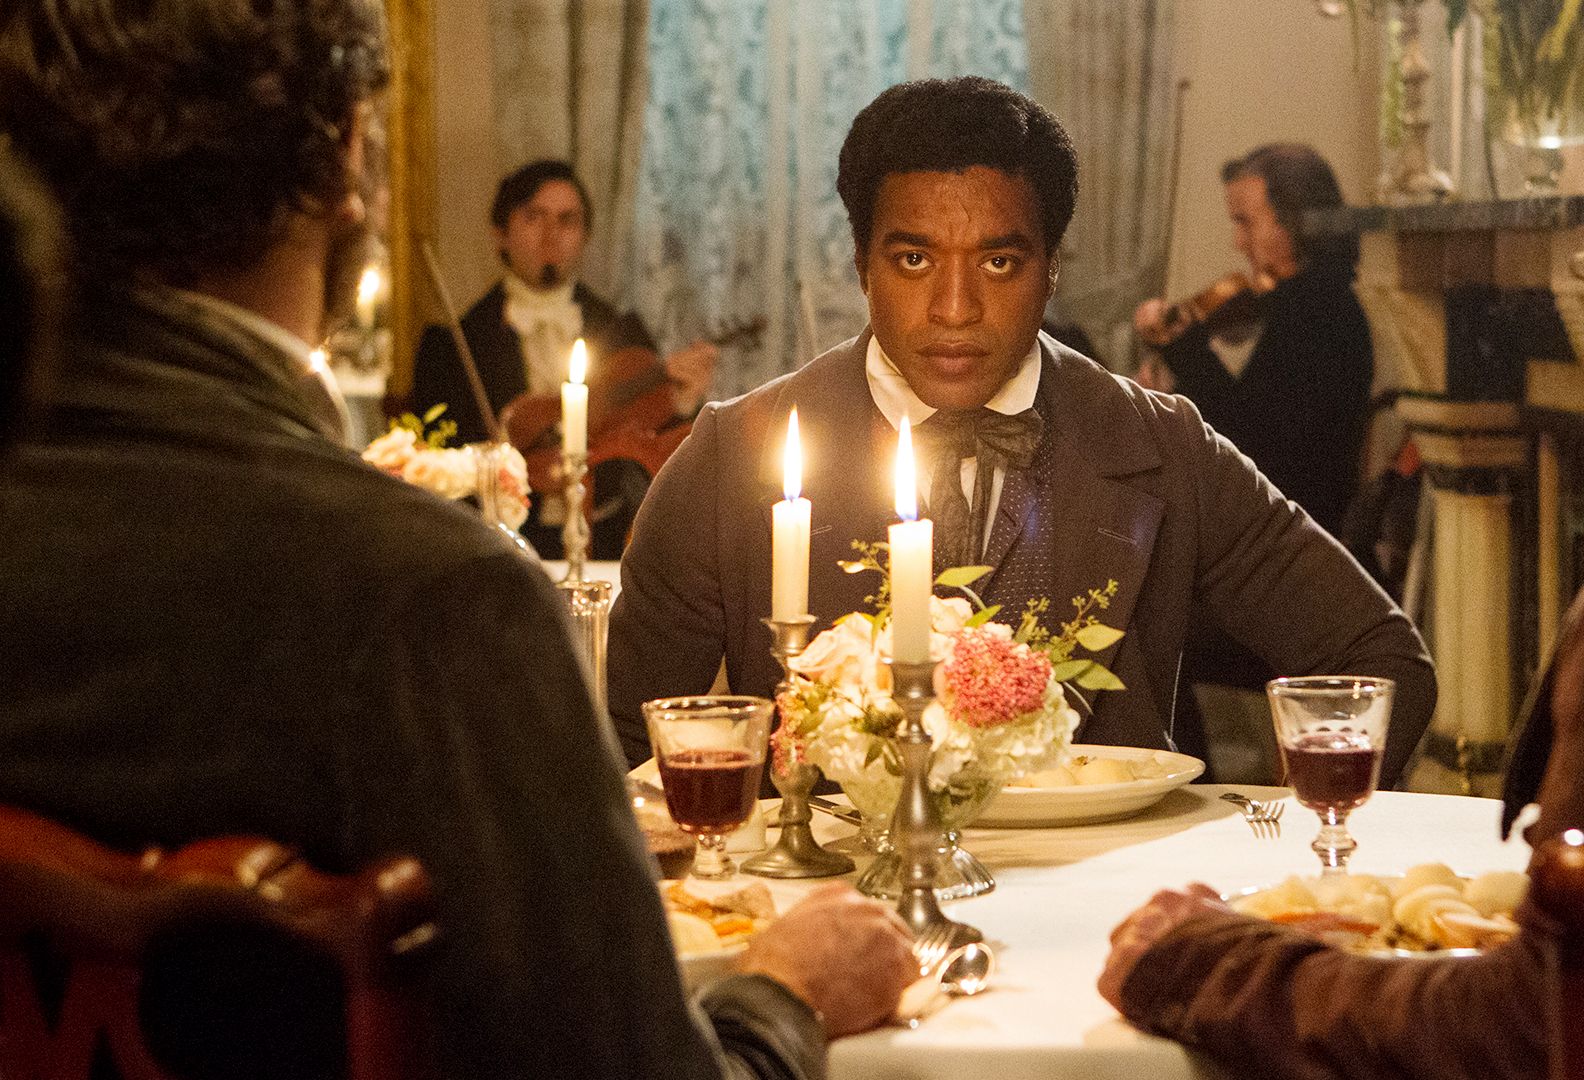 Dinner in 12 Years A Slave